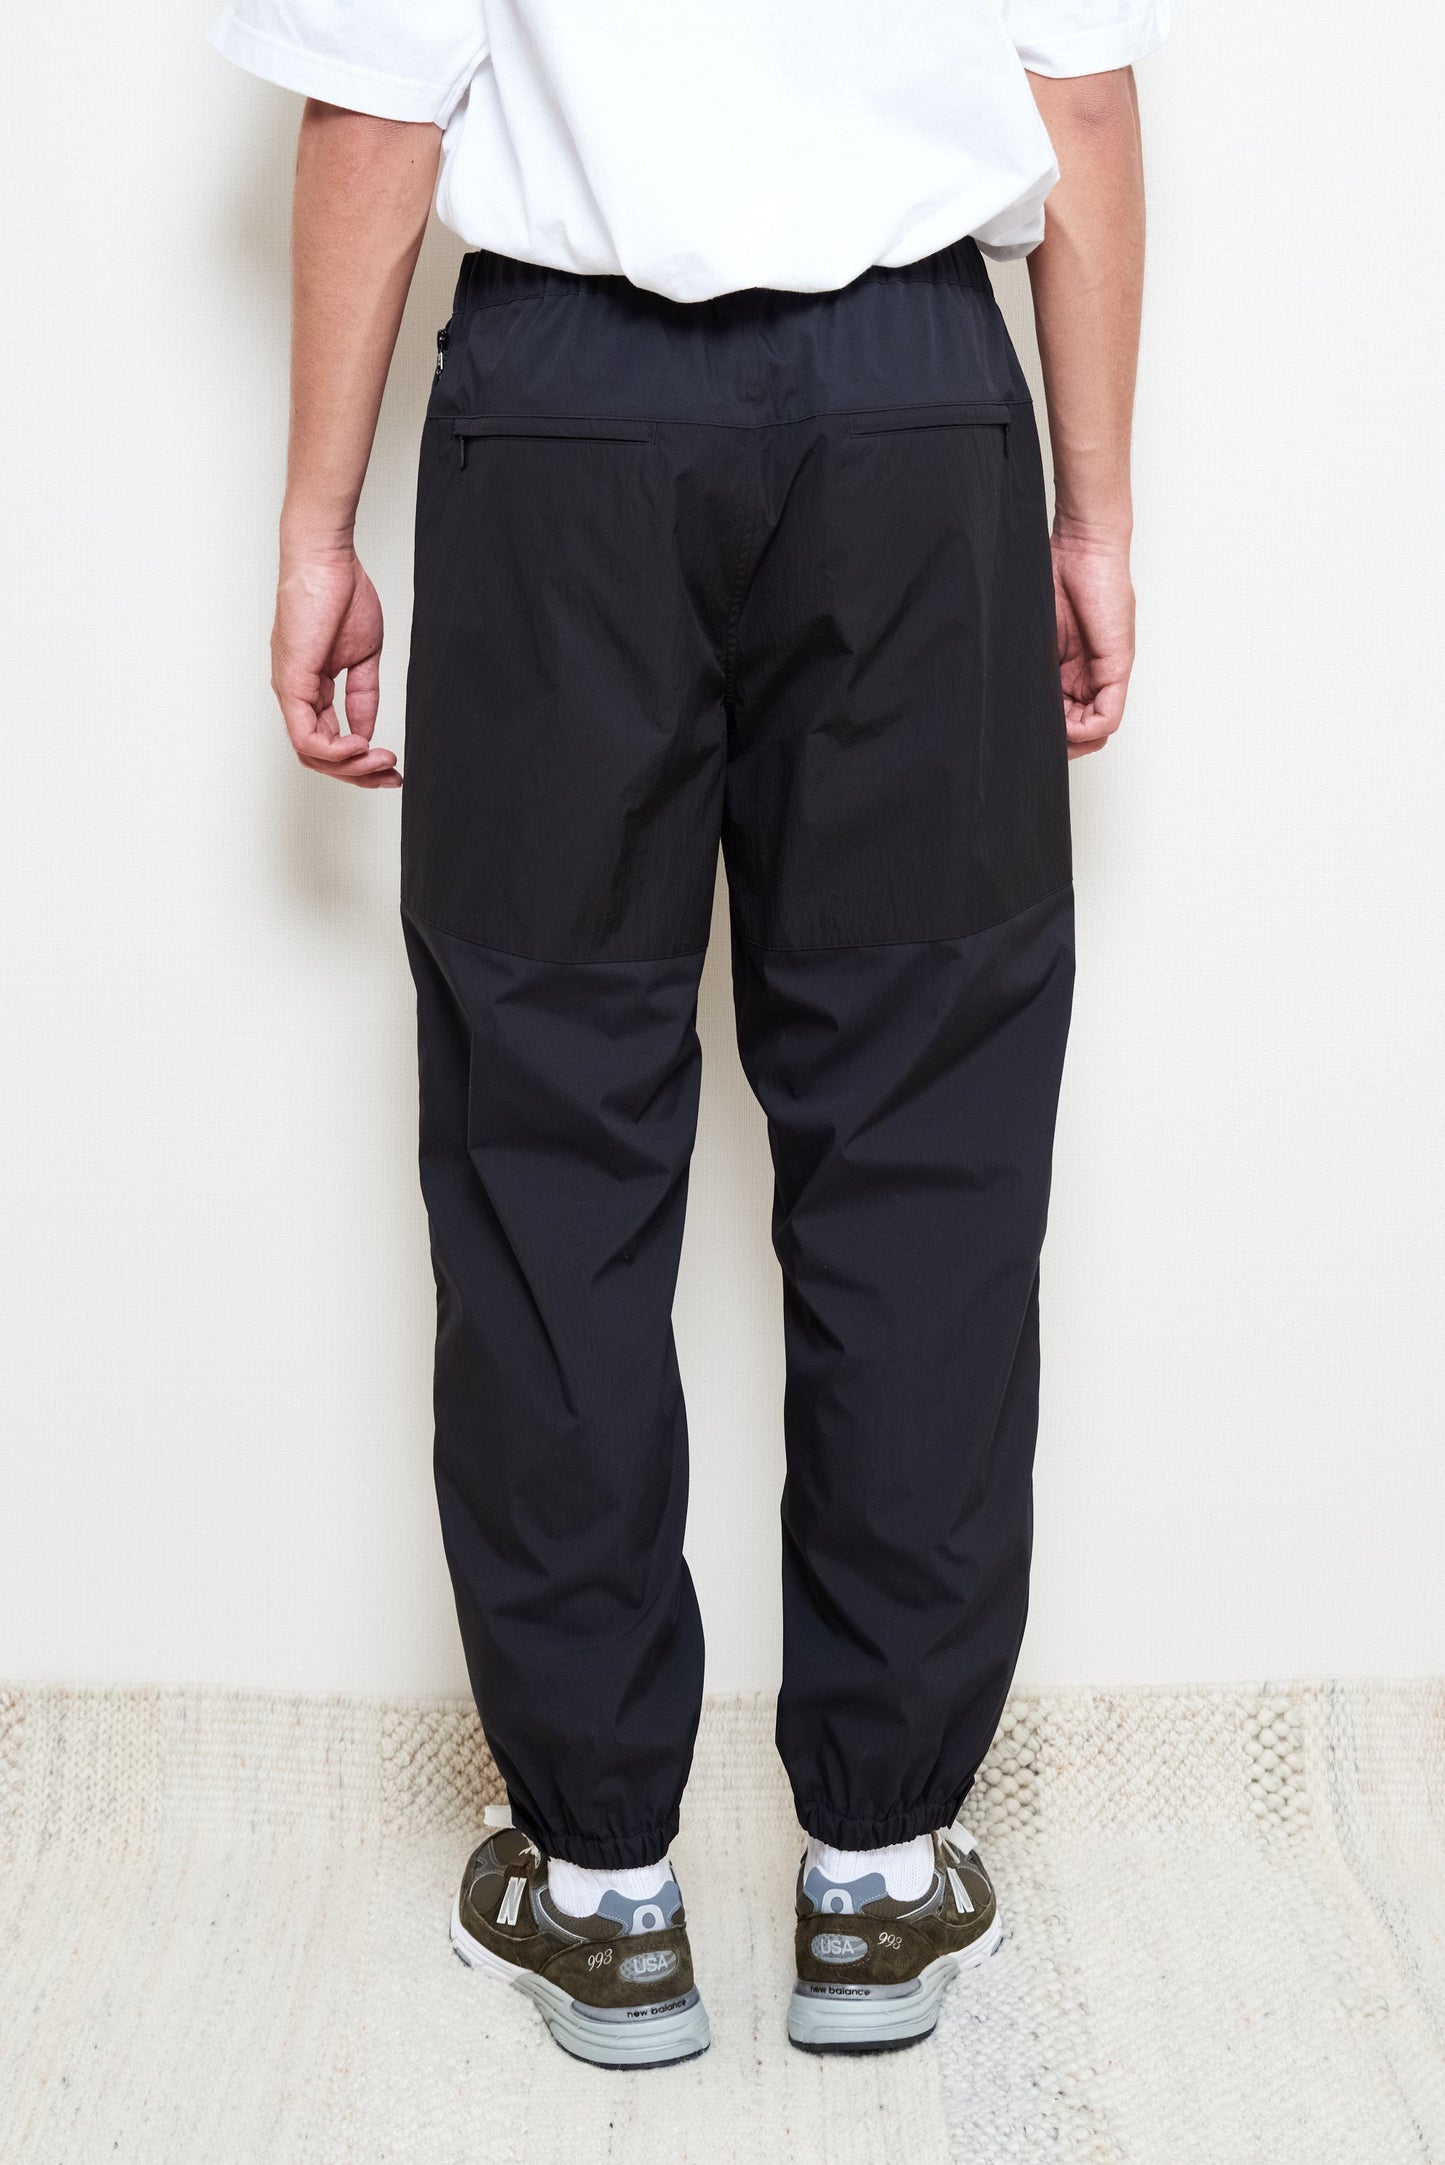 THE HOLY MOUNTAIN VENTILATION PANTS is-ness online shop 9